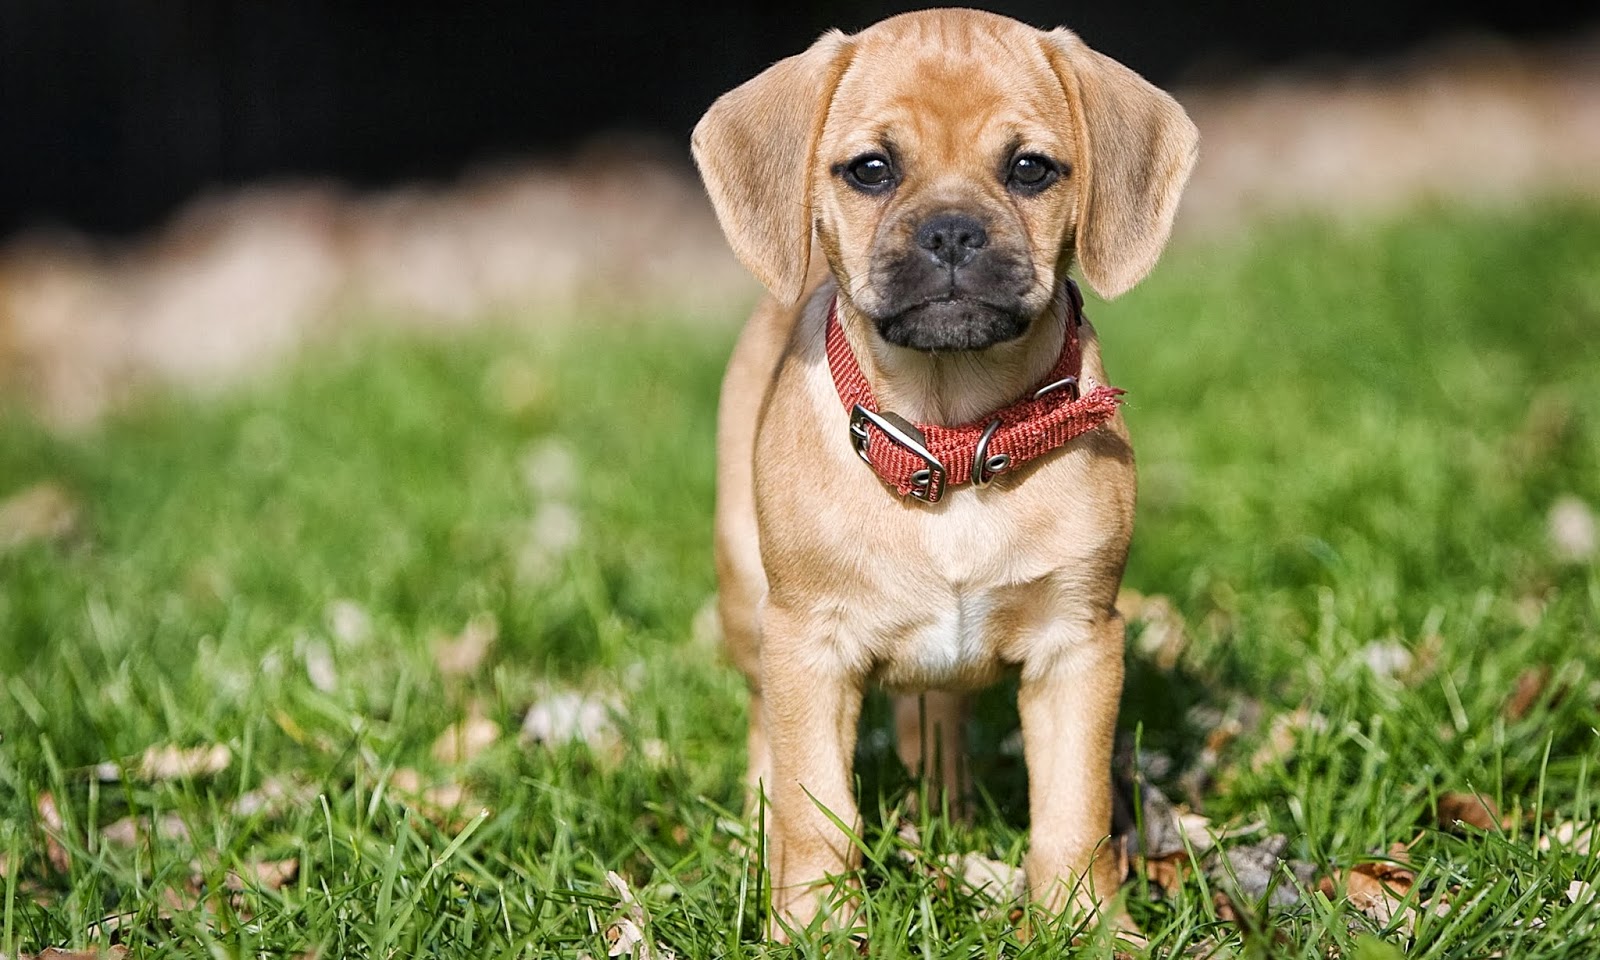 Puppy Photography 1080p Wallpapers | HD Wallpapers (High Definition